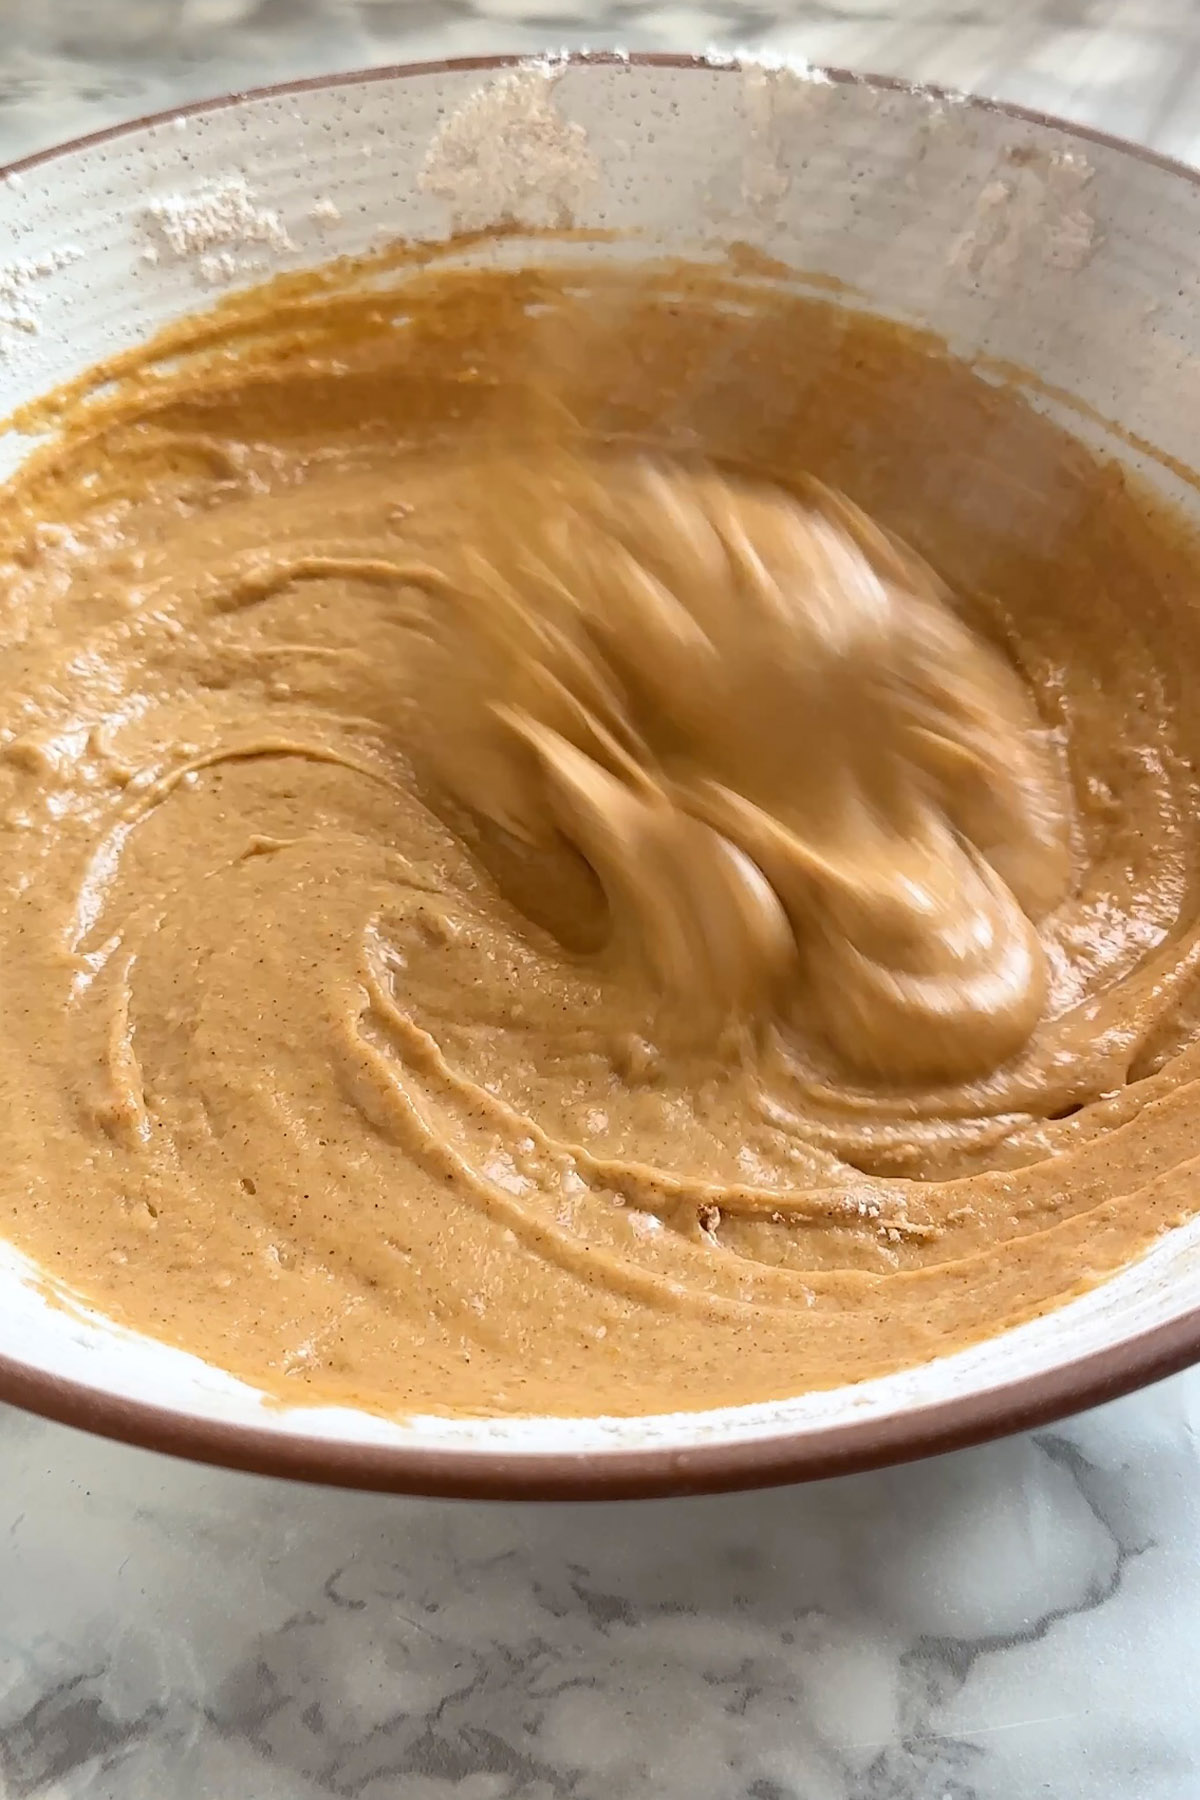 Pancake batter is whisked in a bowl.